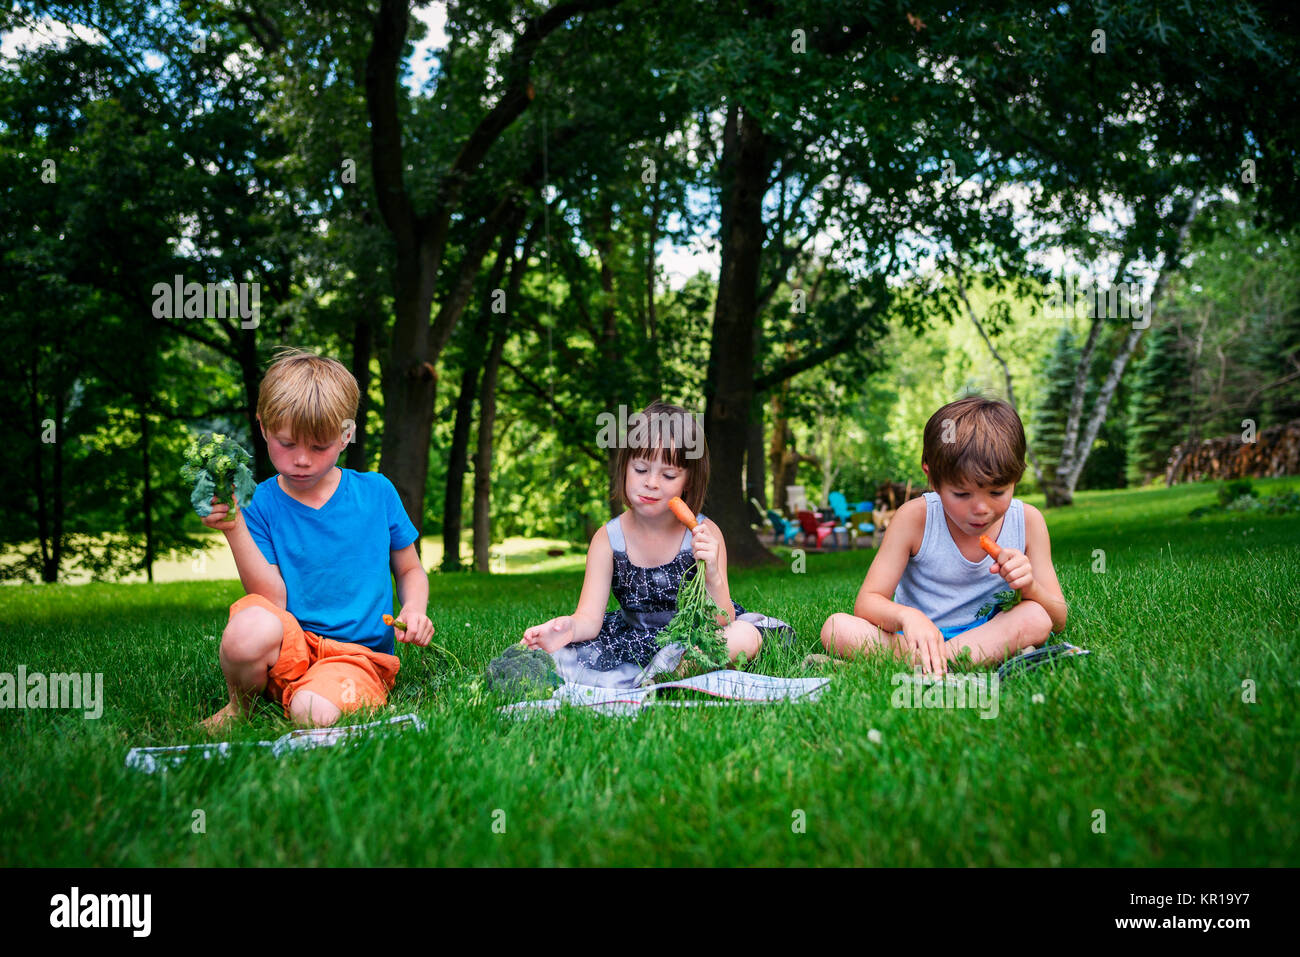 Three children sitting in a garden reading books and eating fresh vegetables Stock Photo